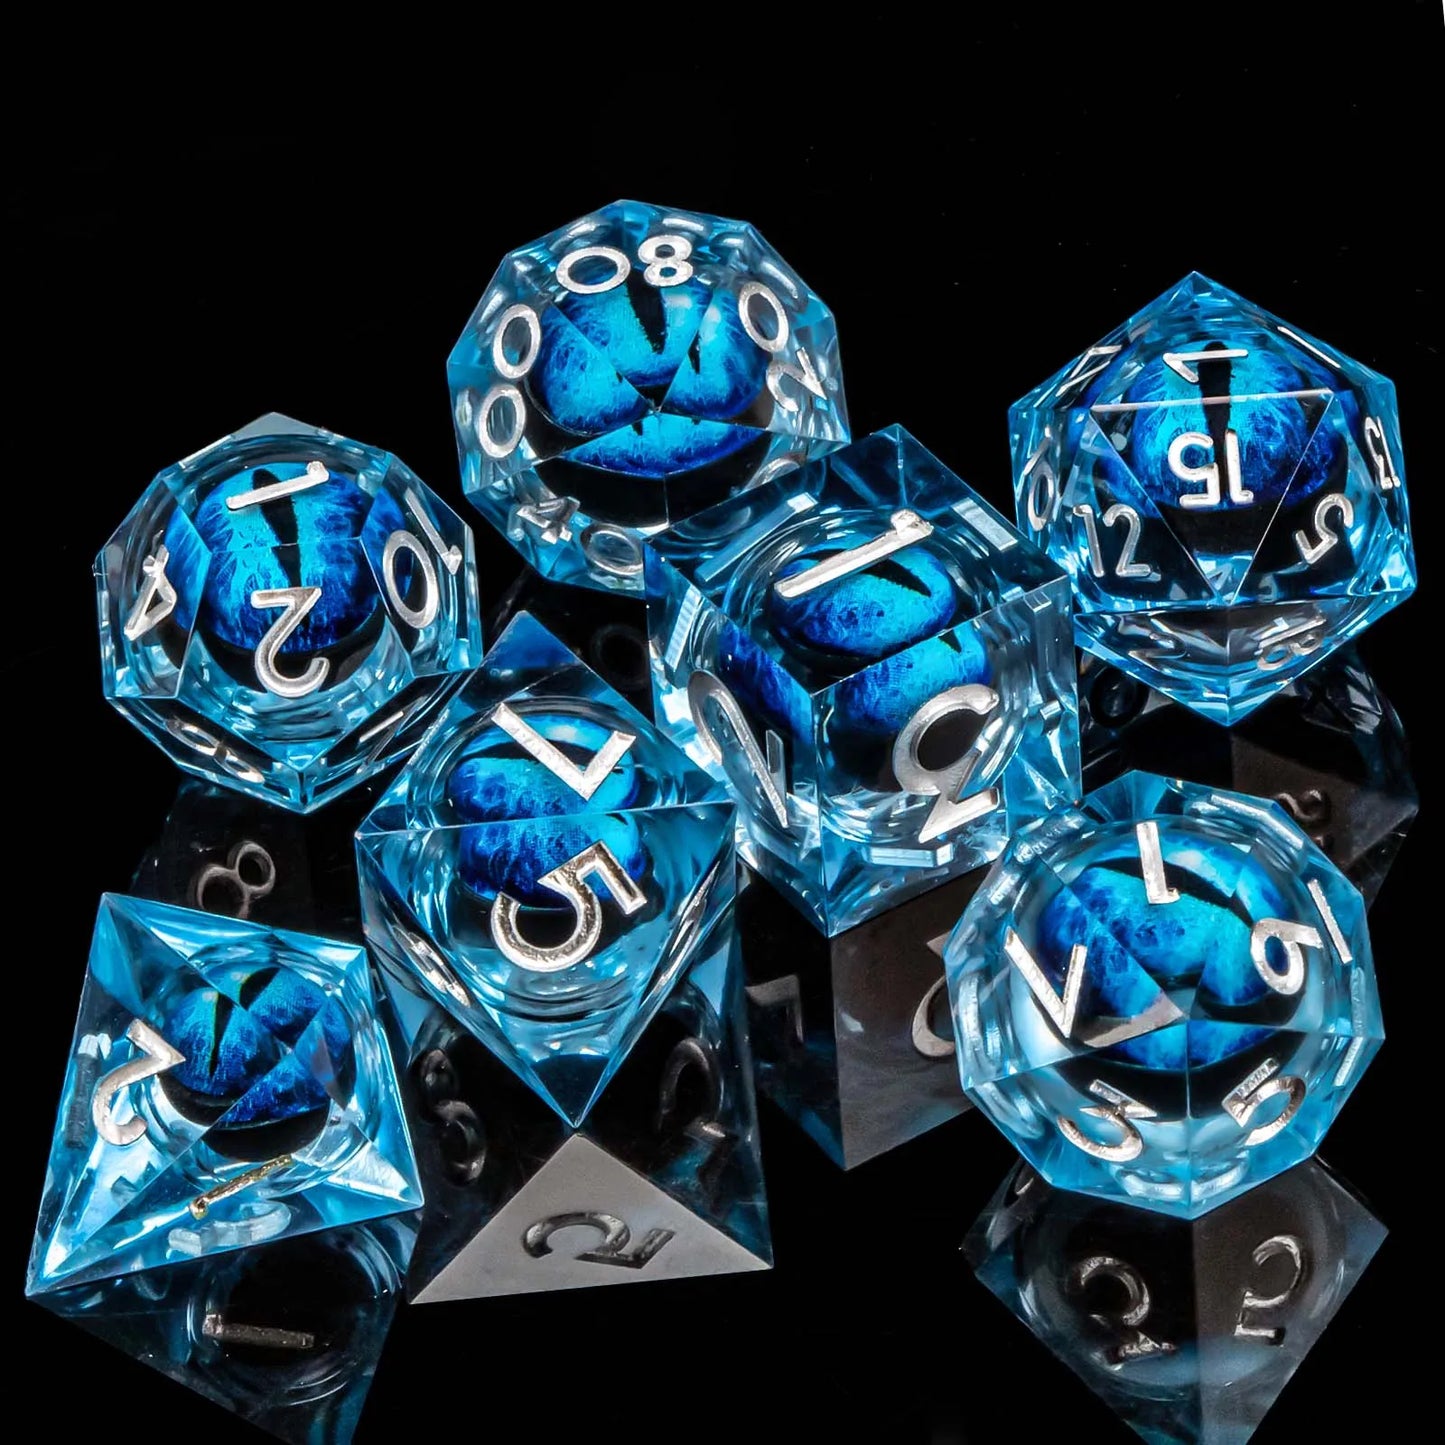 D and D Flowing Sand Sharp Edge Dragon Eye Dnd Resin RPG Polyhedral D&D Dice Set For Dungeon and Dragon Pathfinder Role Playing AZ17